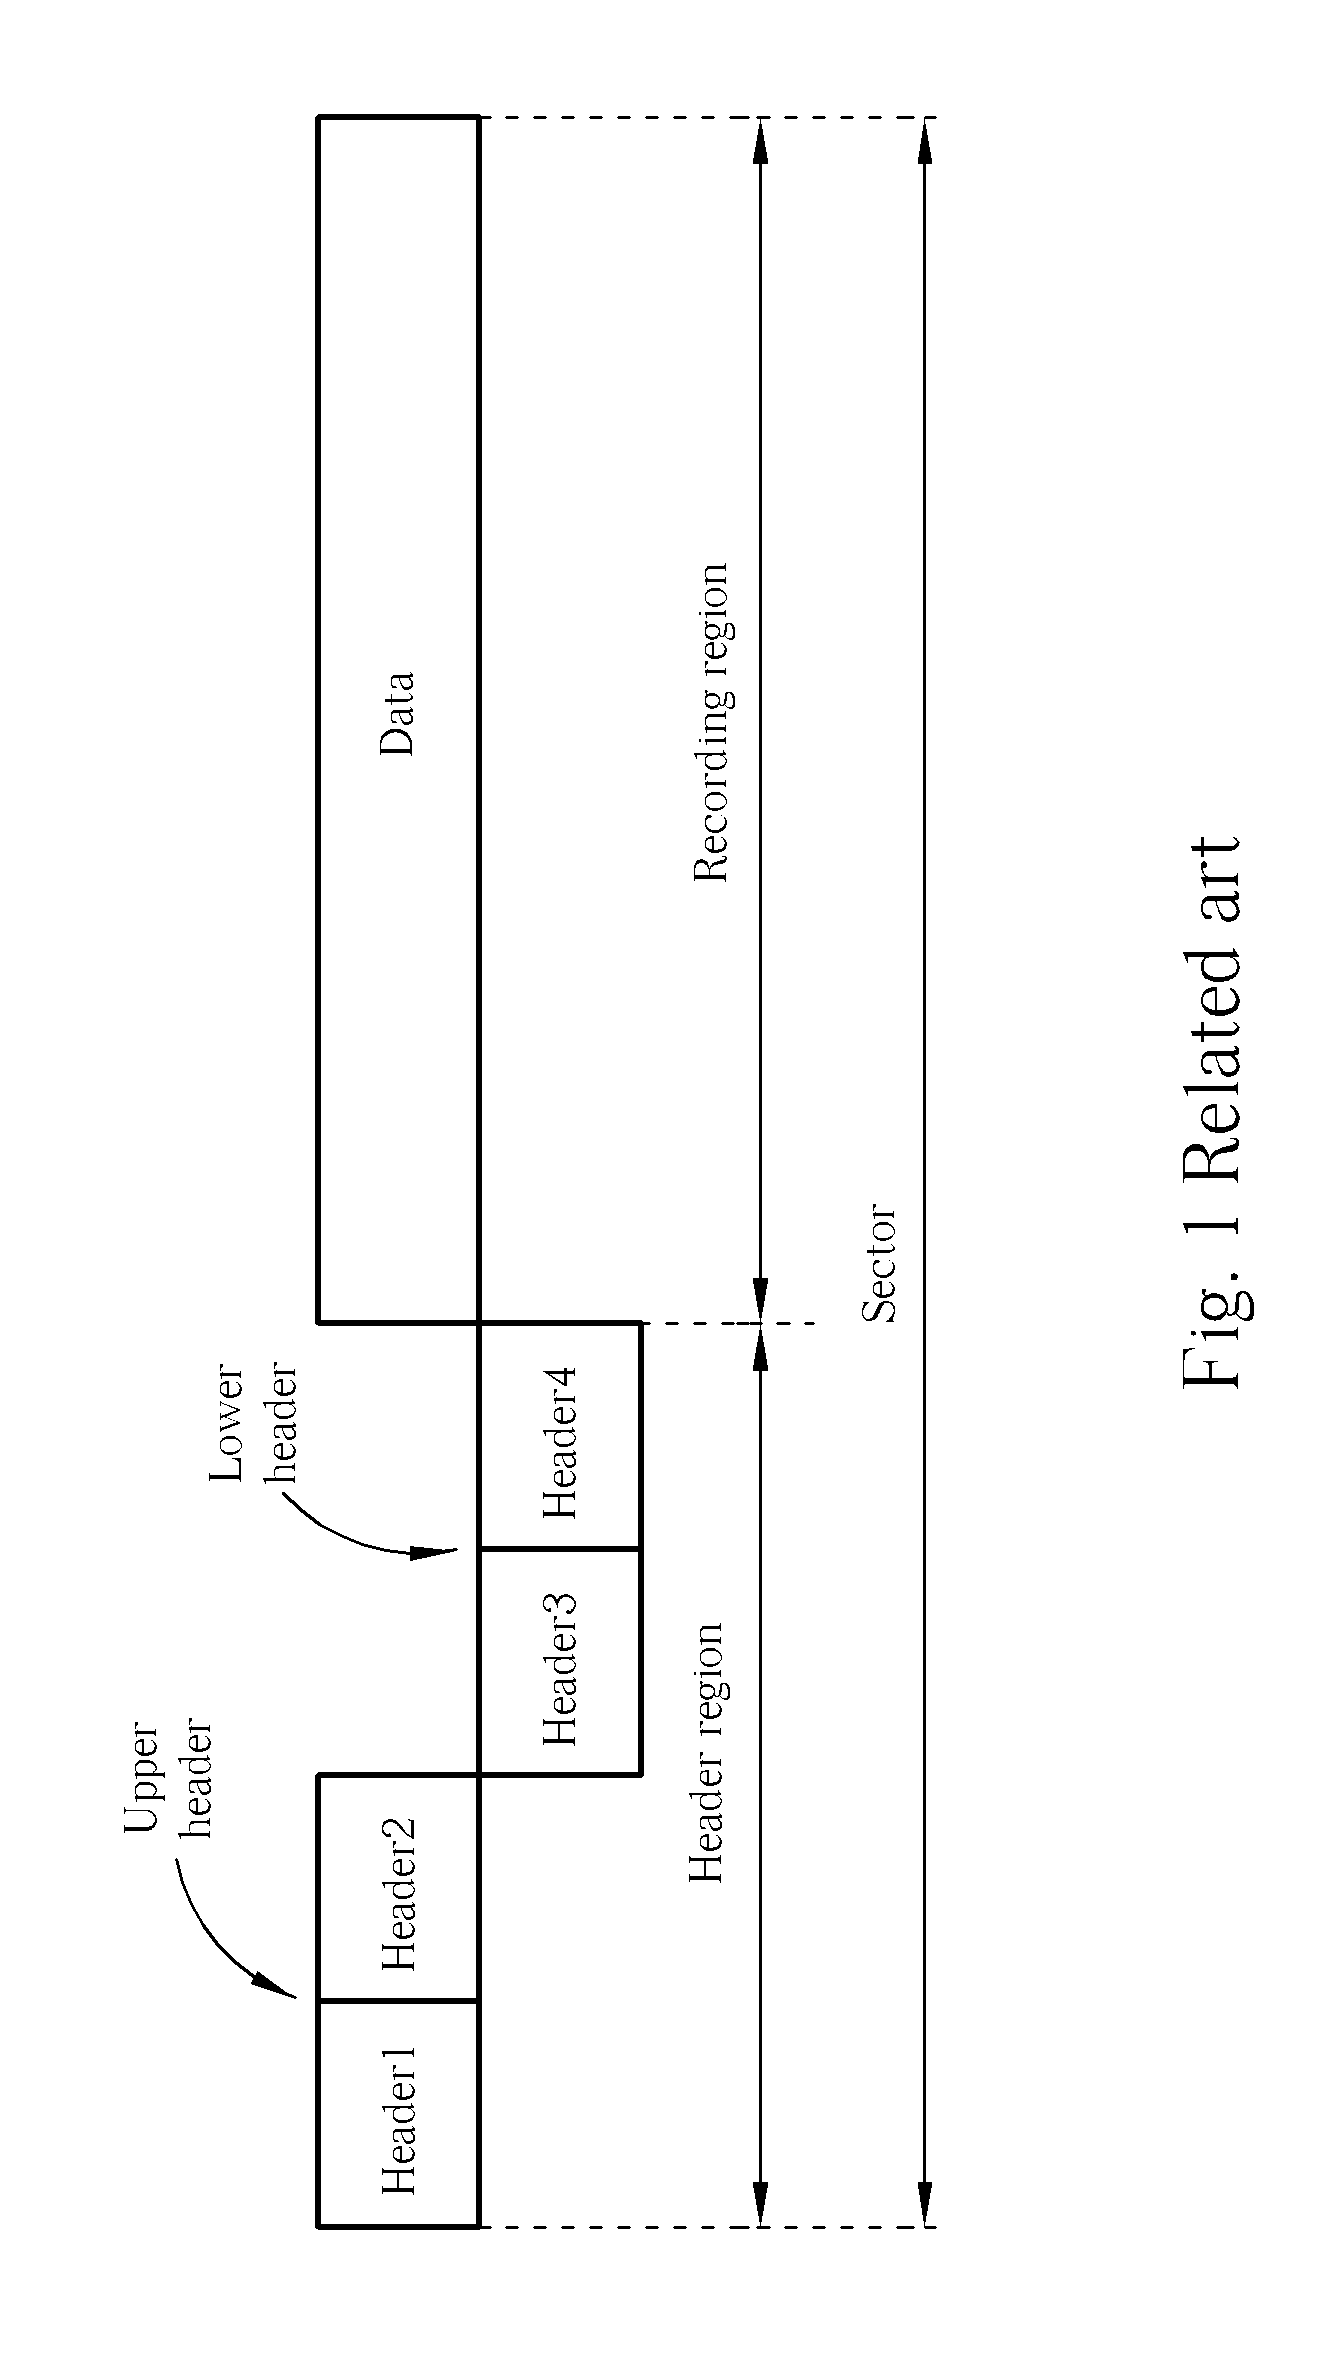 Method for dynamically adjusting header region RF gain while accessing header regions of DVD-RAM disc and apparatus thereof